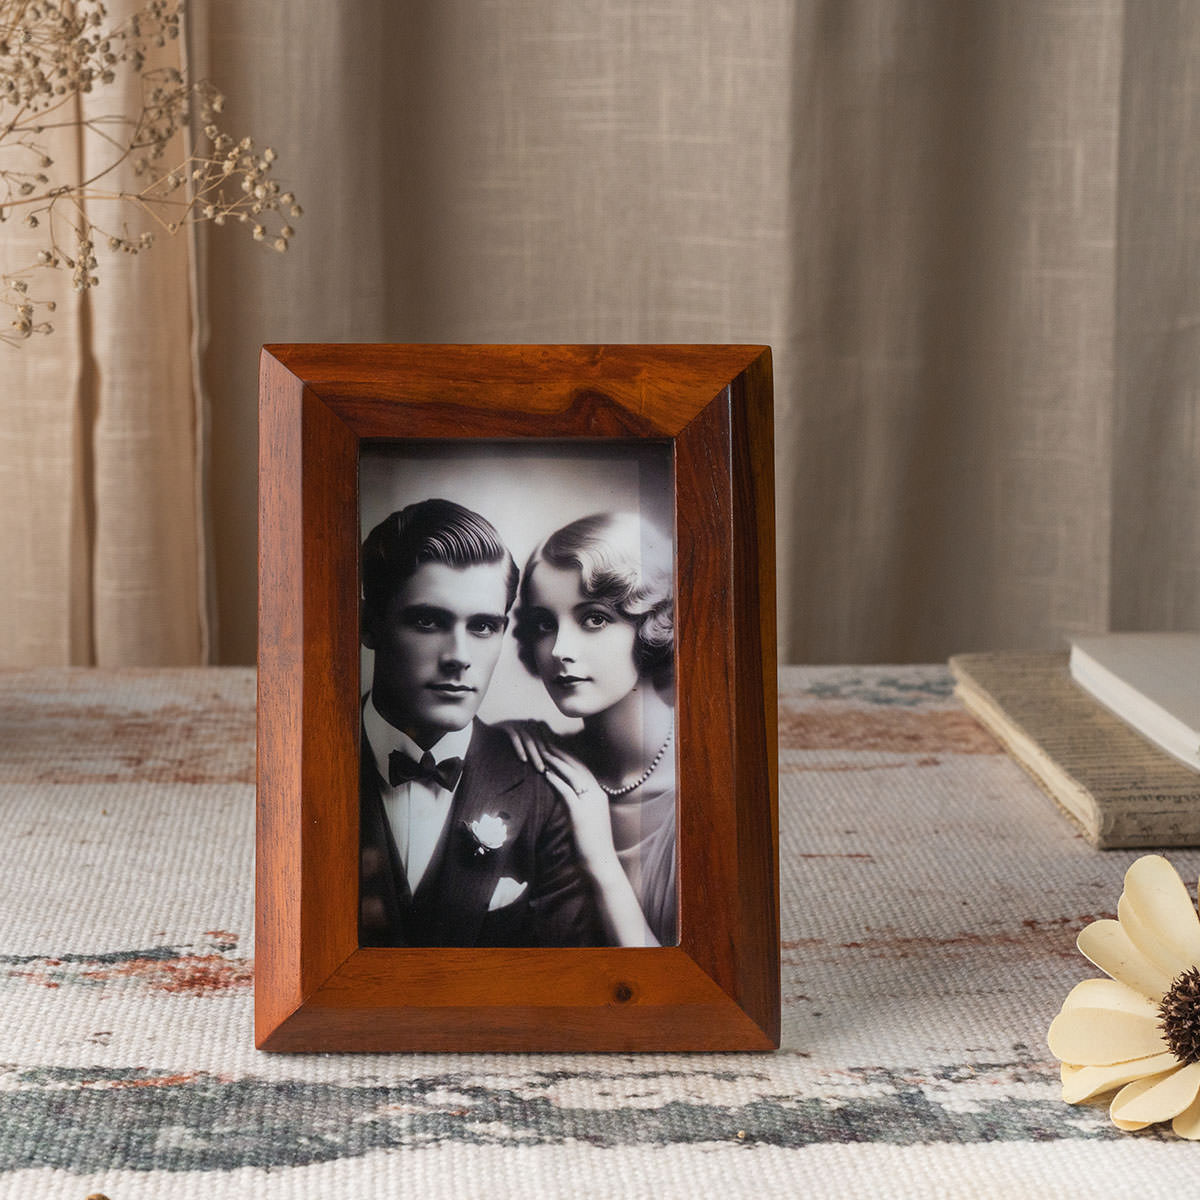 Ferme Classic Minimal Wooden Photo Frame Brown FPF107 - 4x6 inches